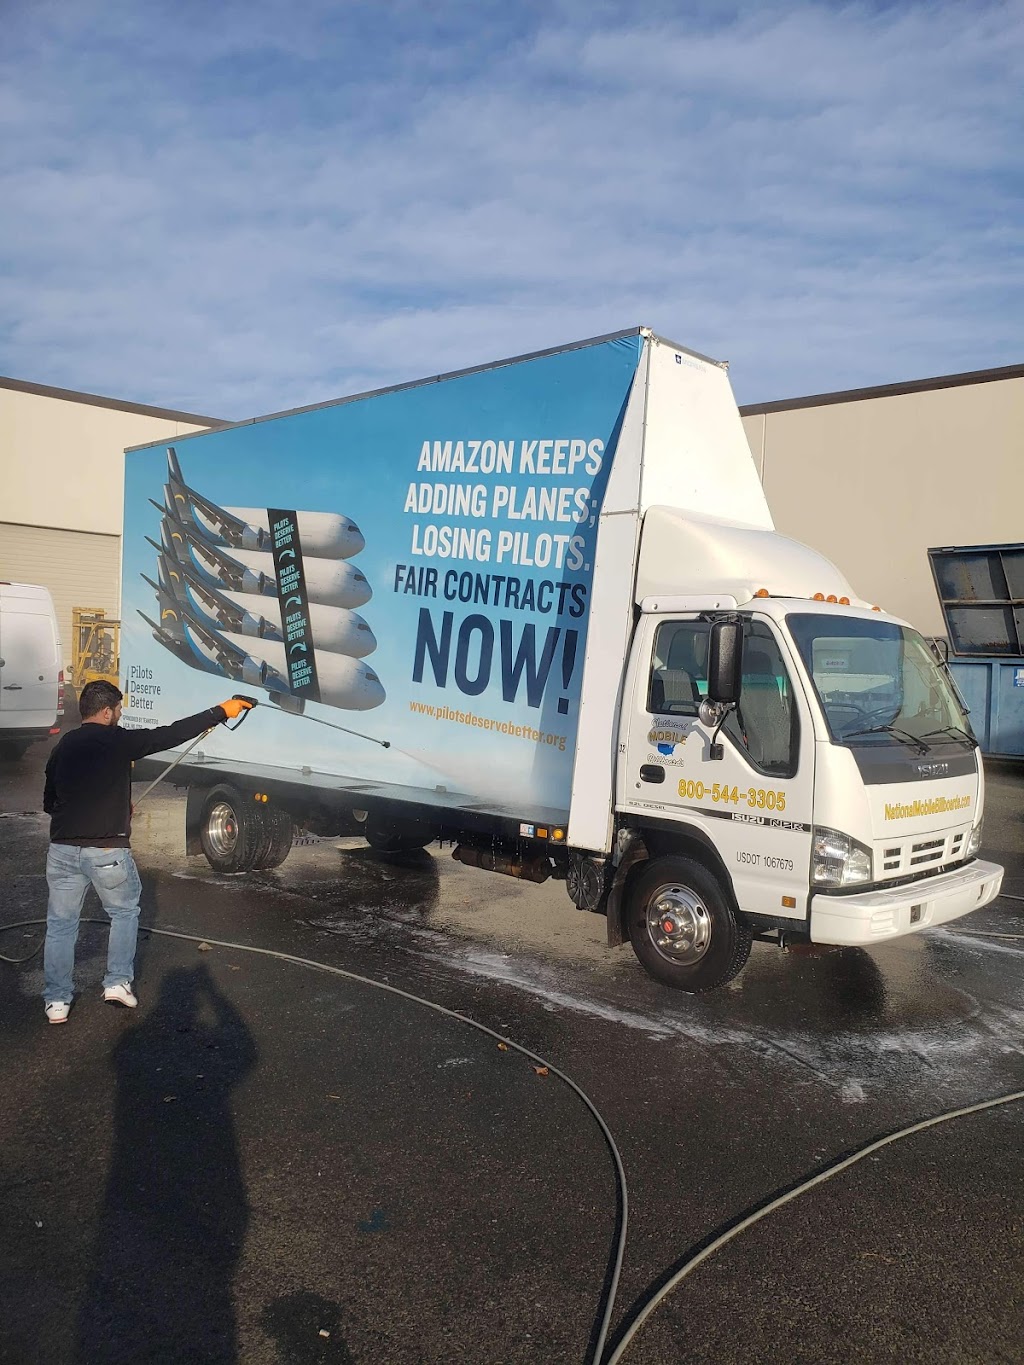 Mobile Brothers Truck Wash LLC | 23240 88th Ave South, Kent, WA 98031 | Phone: (206) 866-8904